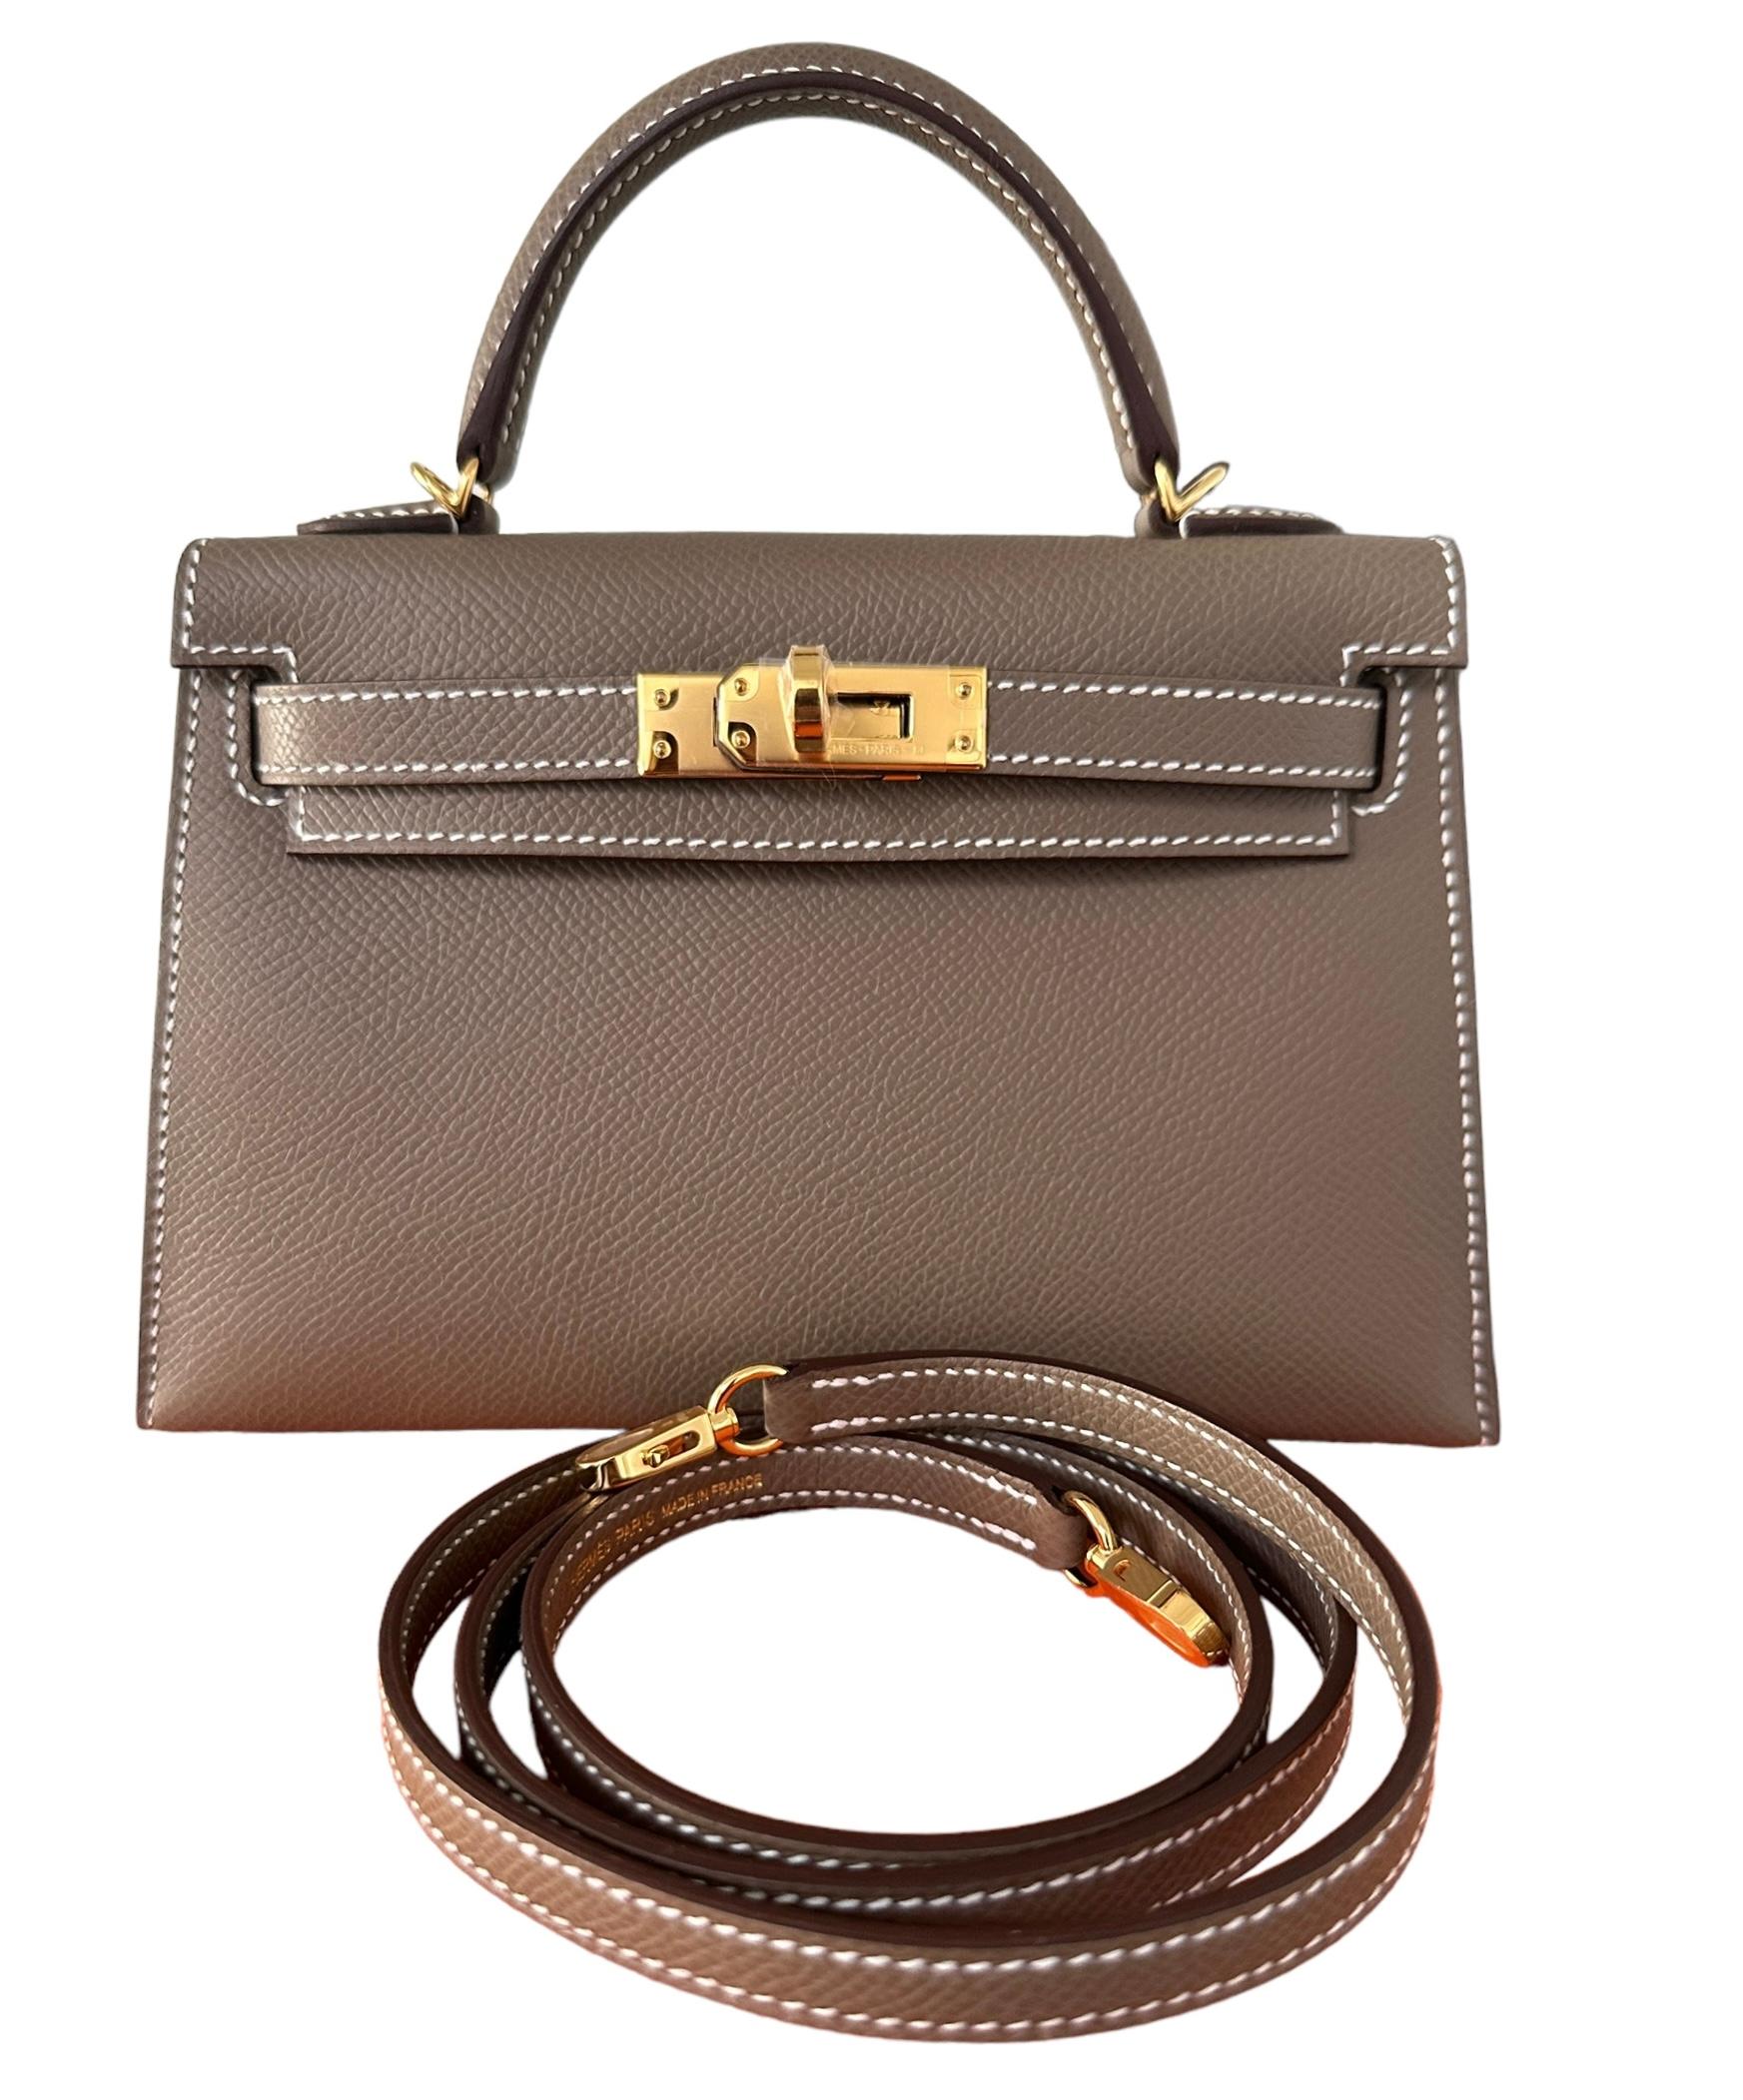 Hermes
Called the Mini Kelly
20cm 
Just arrived from the Hermes Boutique
This Kelly, in the Sellier style, is in one of the most popular colors Hermes sells, Etoupe, a perfect neutral, in epsom leather with gold hardware and has contrast stitching